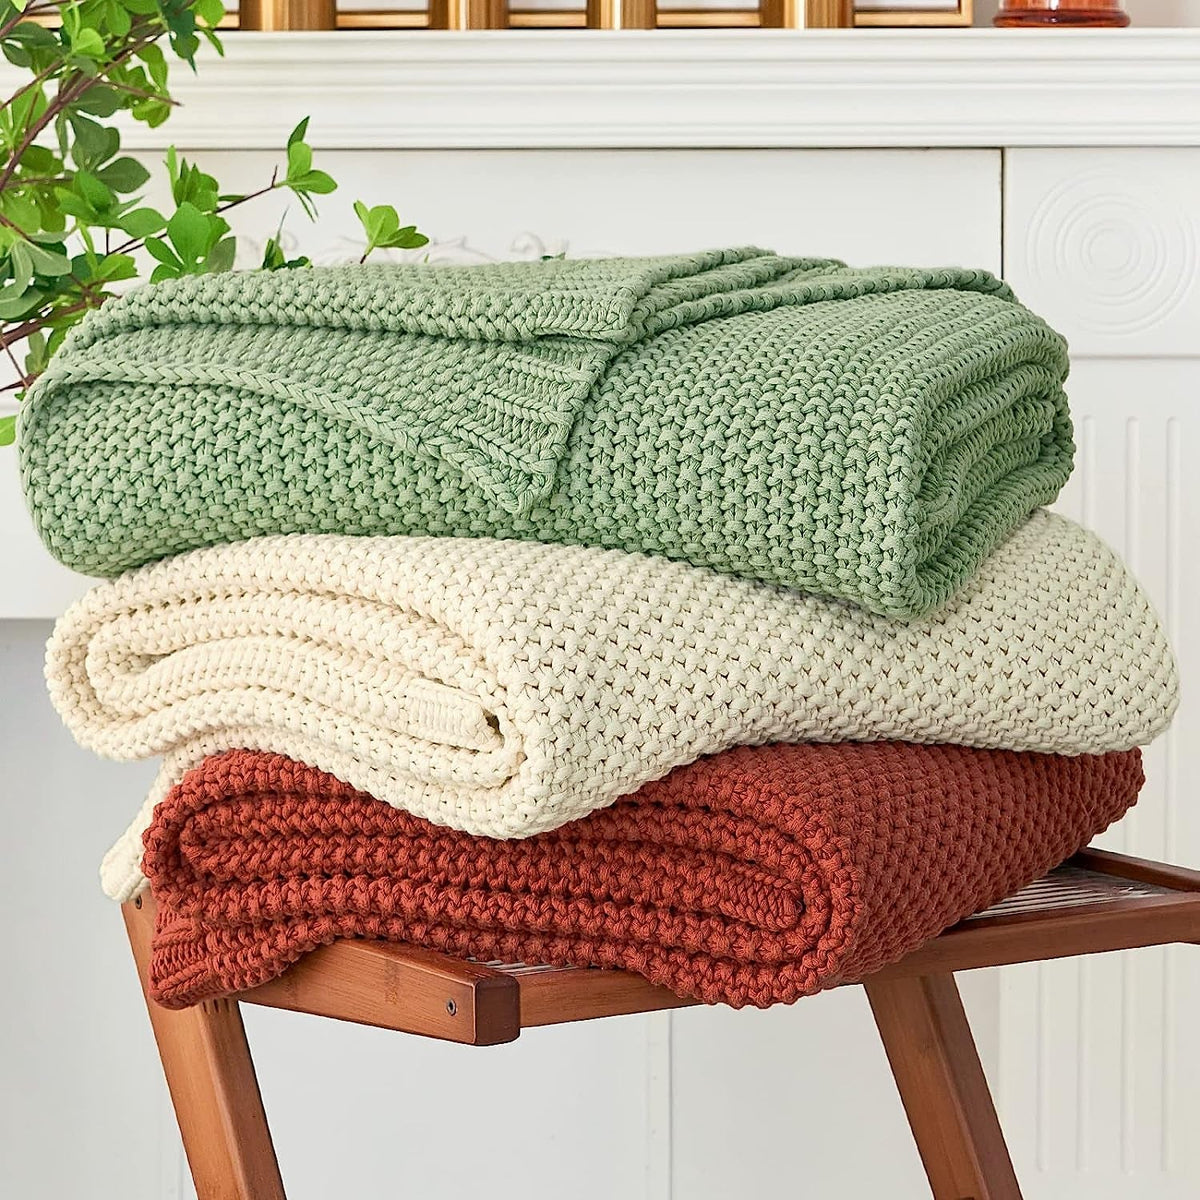 Pineapple Retreat Solid Organic Cotton Knit Throw Blanket | Hypoallergenic - Allergy Friendly - Naturally Free